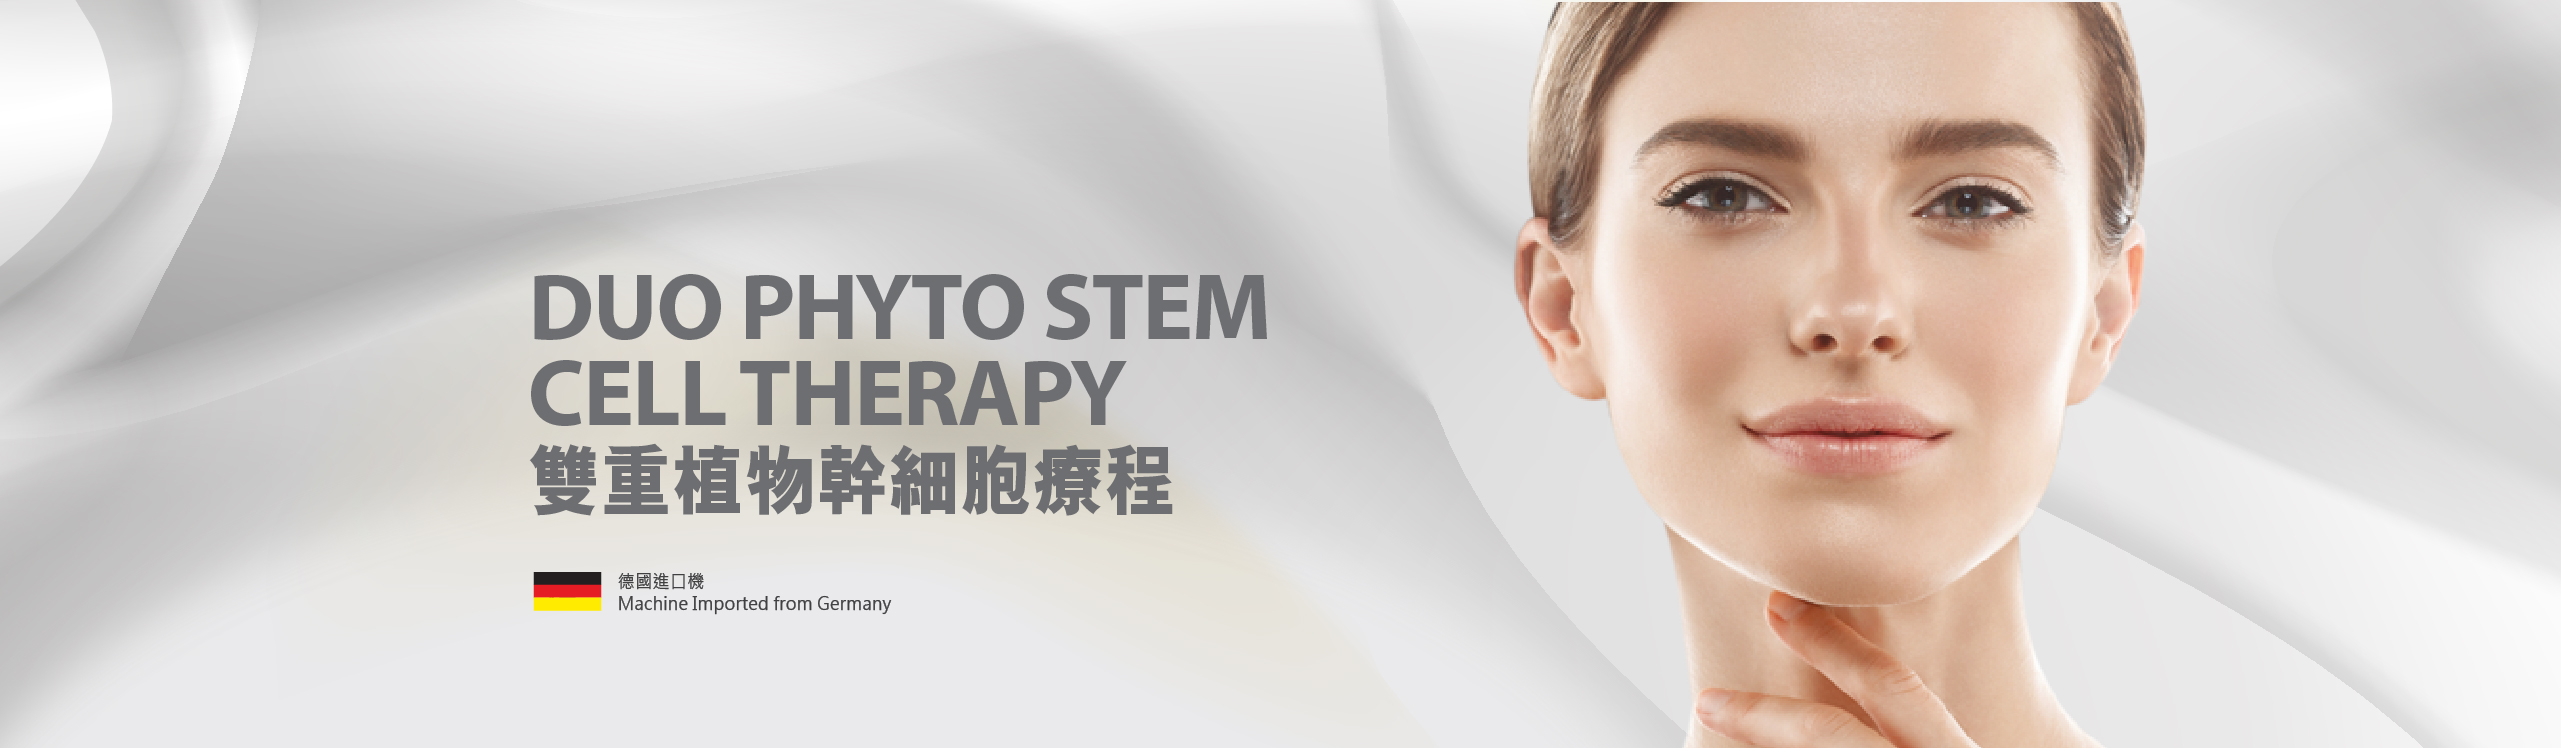 AS Duo Phyto Stem Cell Therapy-04